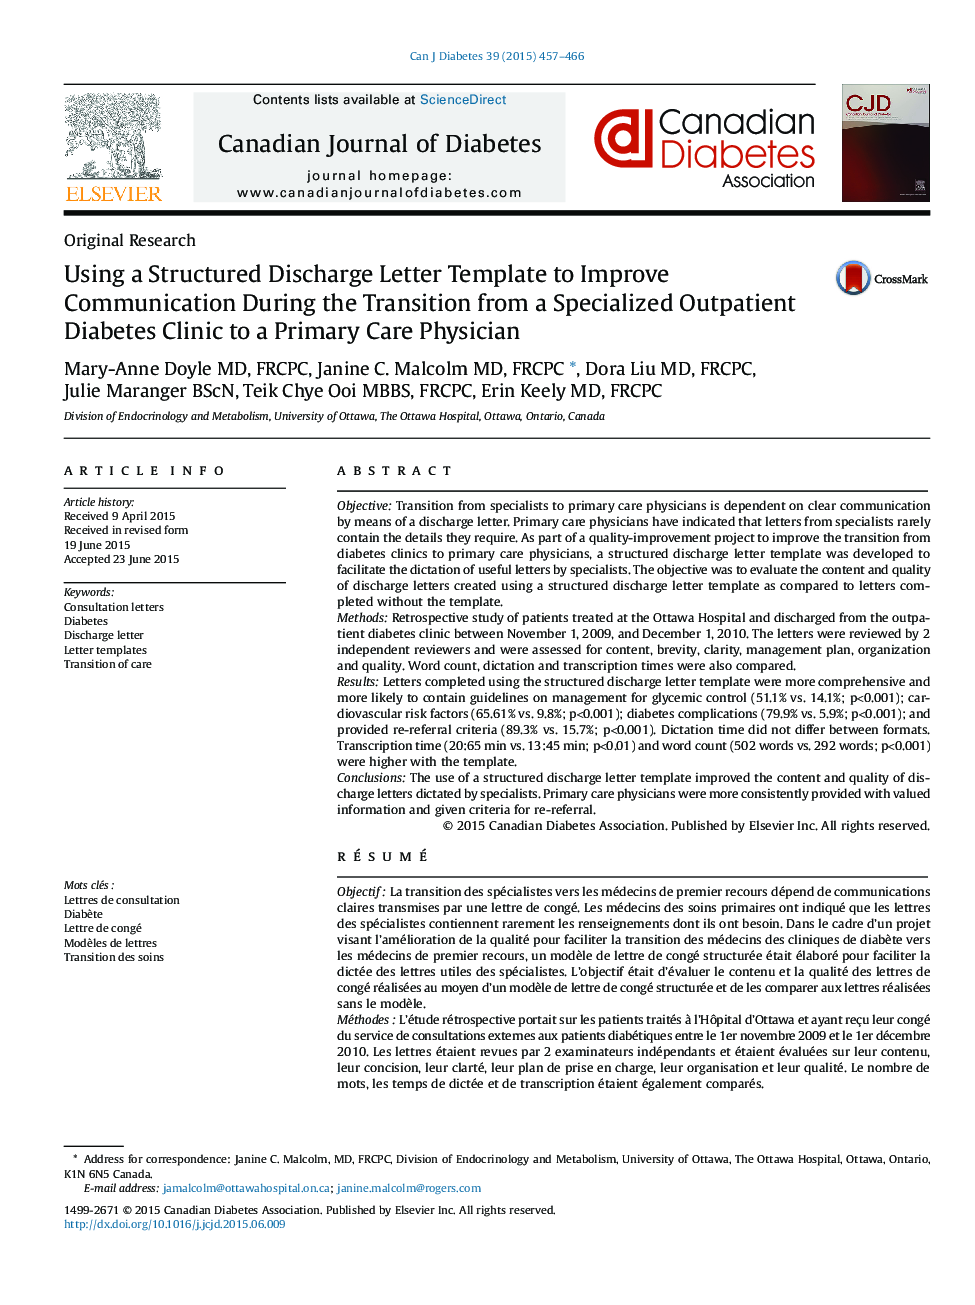 Original ResearchUsing a Structured Discharge Letter Template to Improve Communication During the Transition from a Specialized Outpatient Diabetes Clinic to a Primary Care Physician